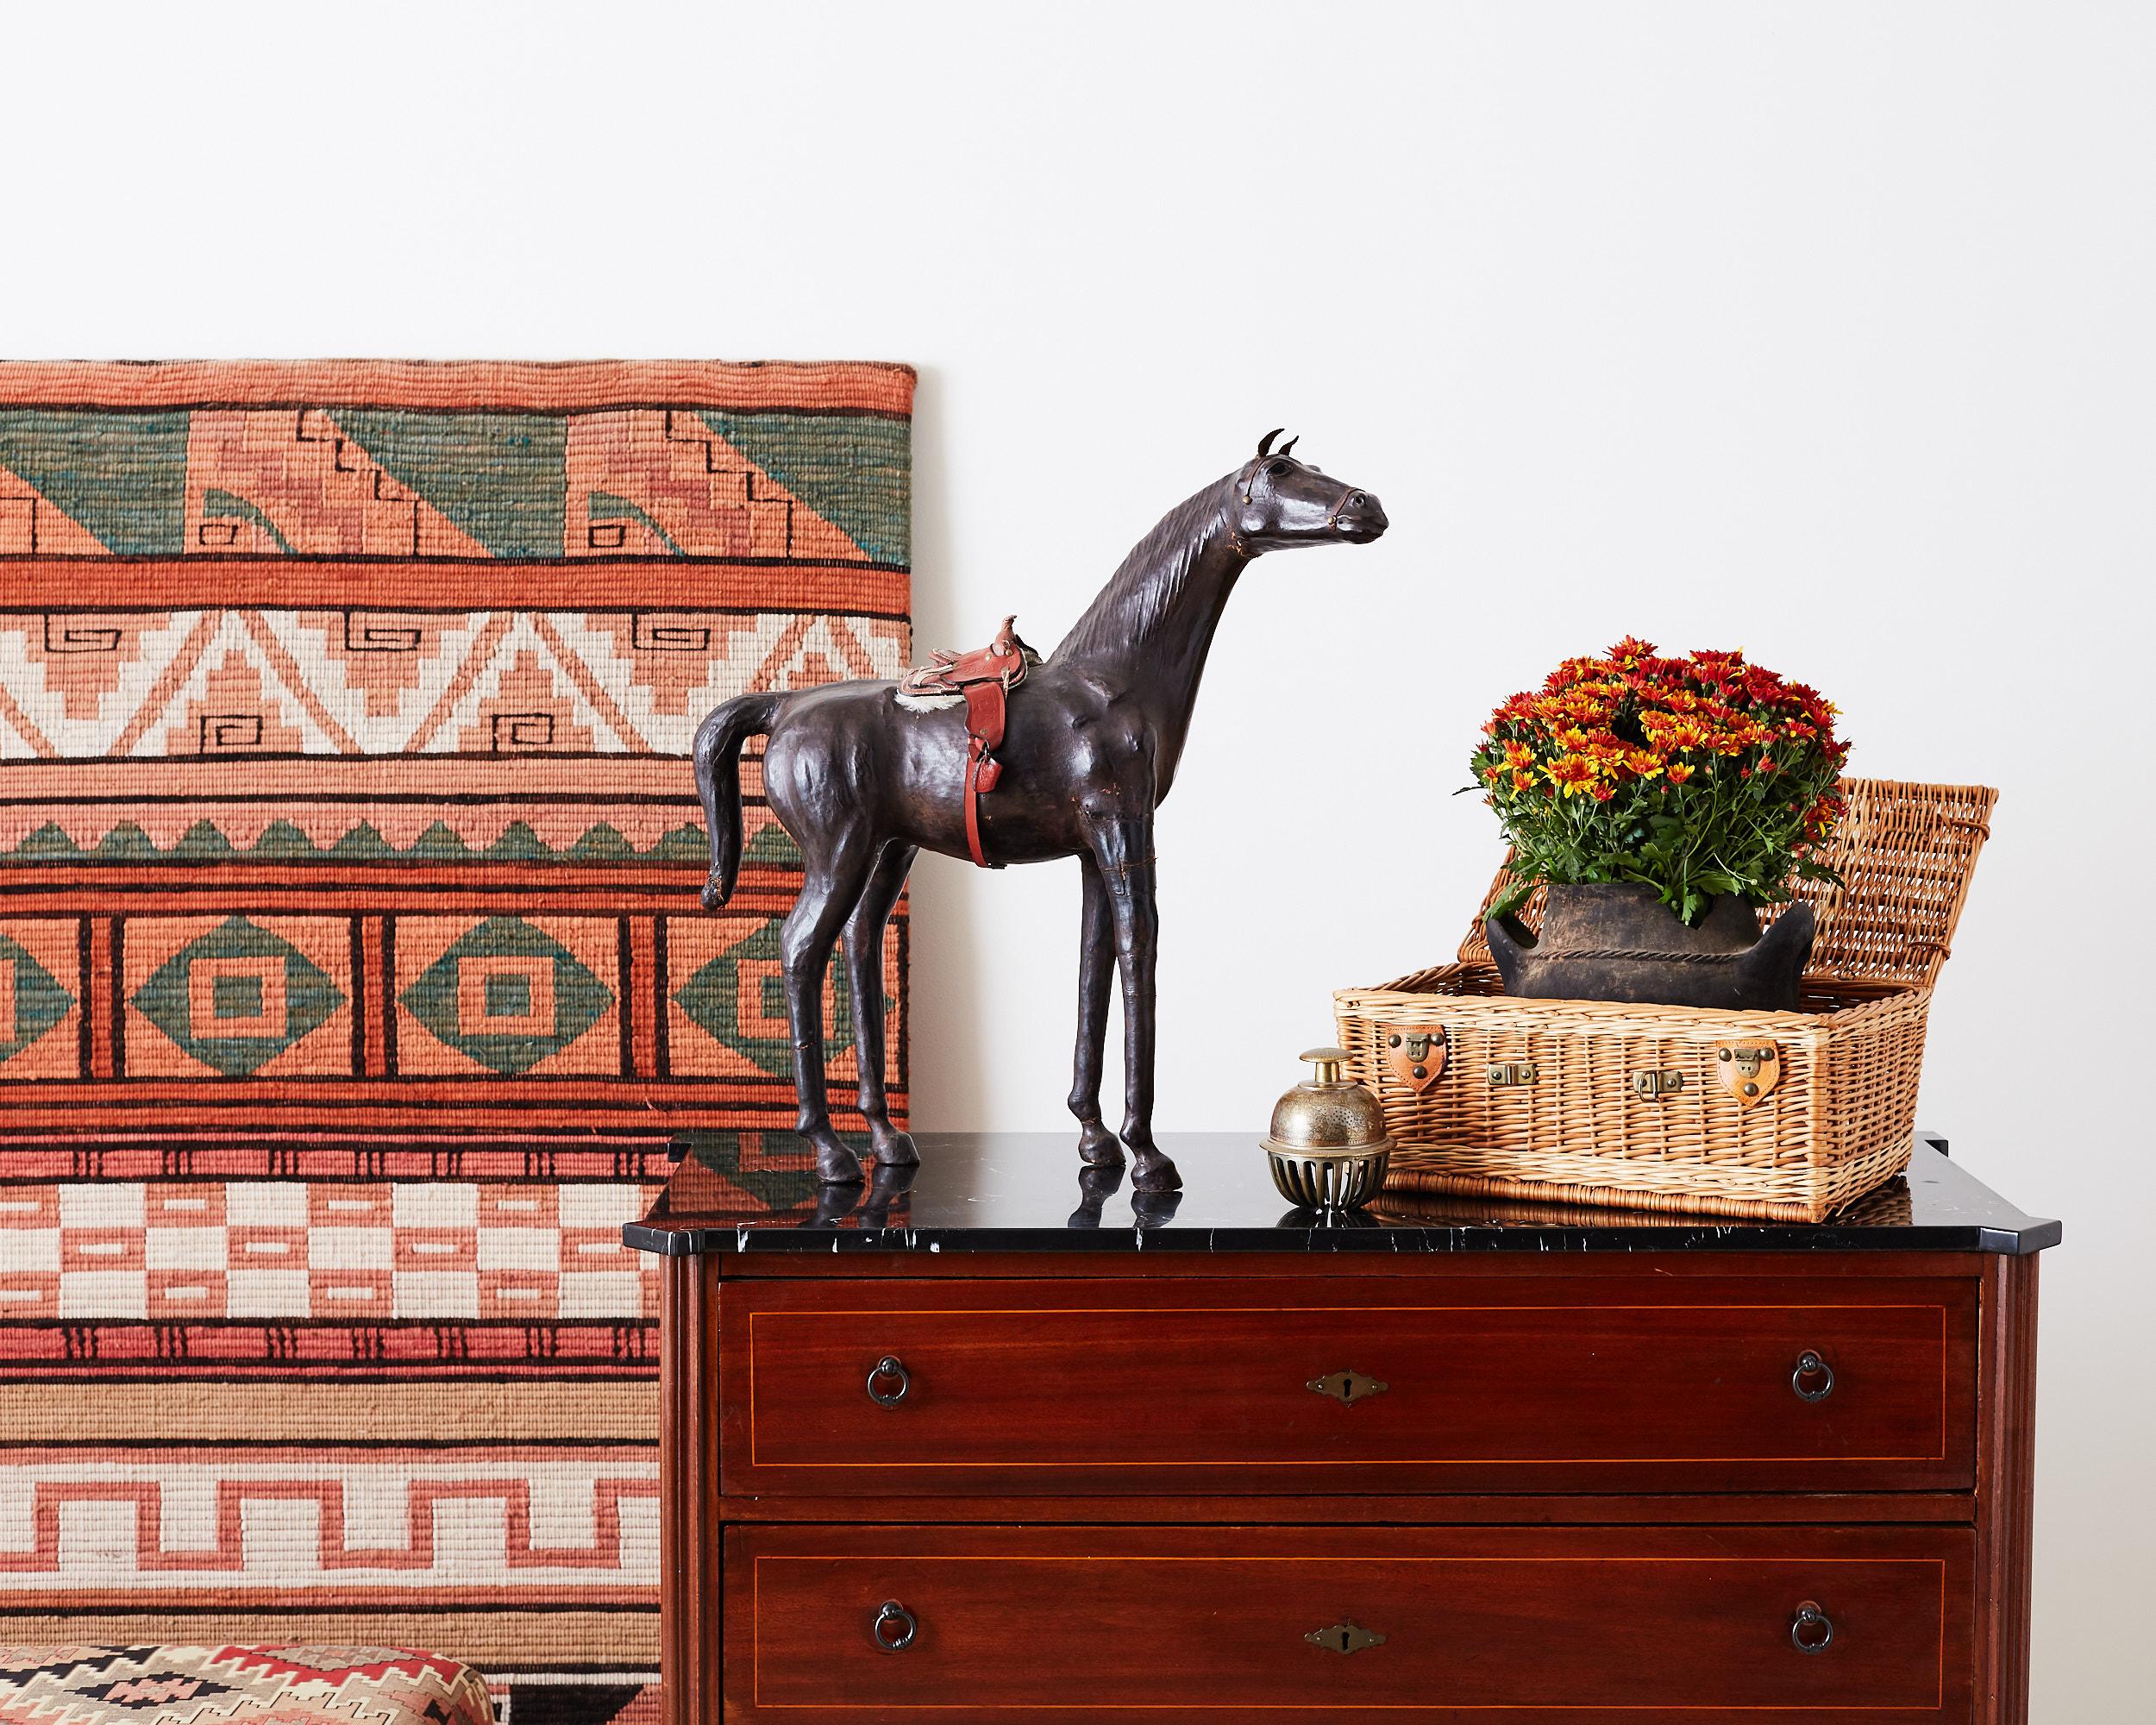 Large Mid-Century Modern handmade leather thoroughbred horse sculpture featuring a red tooled leather saddle with a shearling lining. This lovely horse has a statuesque pose with interesting glass eyes. Beautiful vintage patina on the leather.